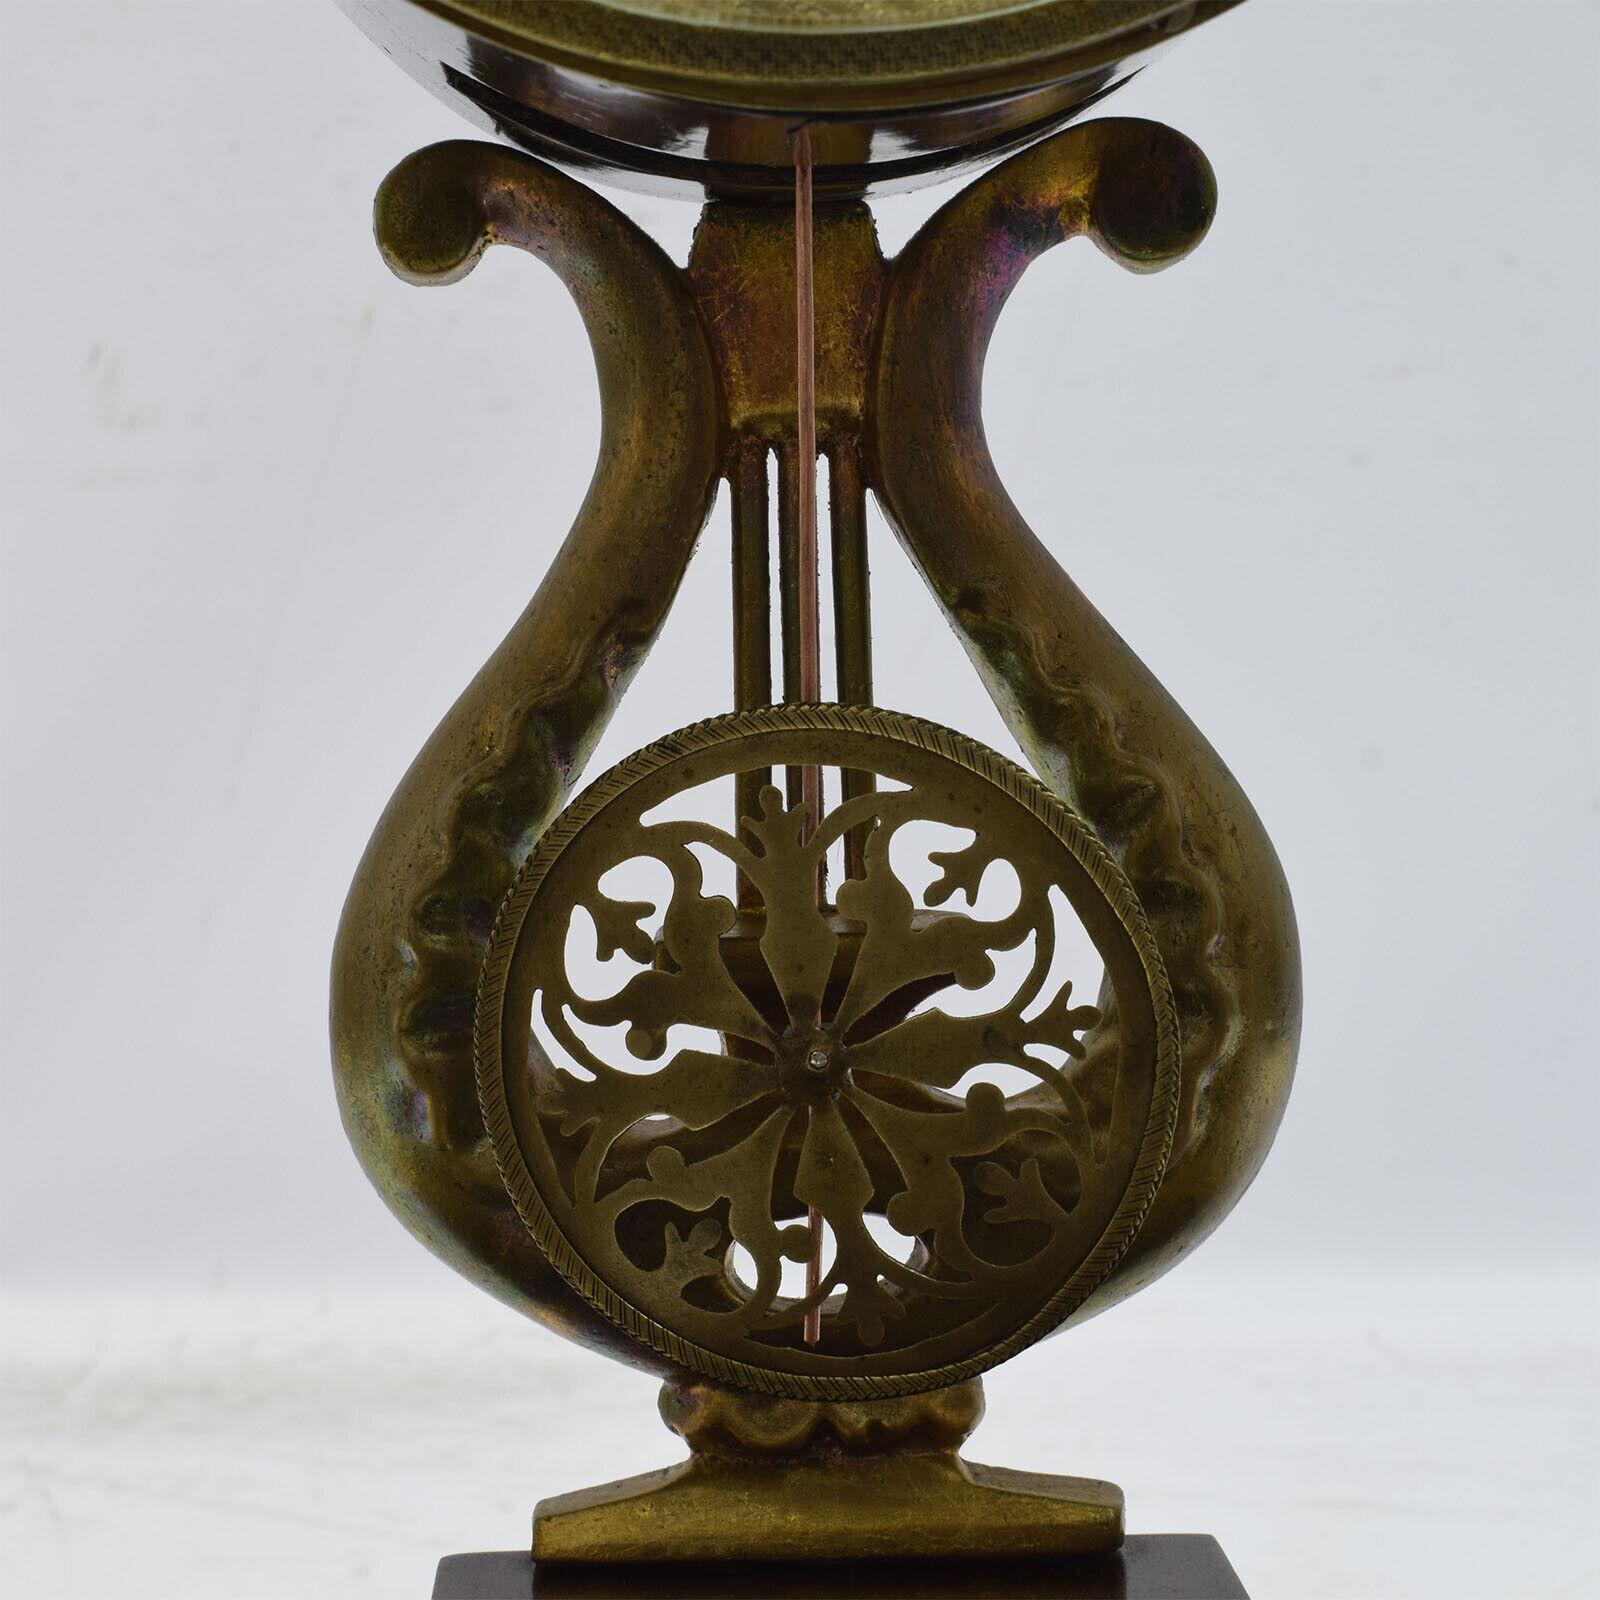 19th Century Functional Column Clock, Antique Mantel Clock with Portico, 1G03 For Sale 4